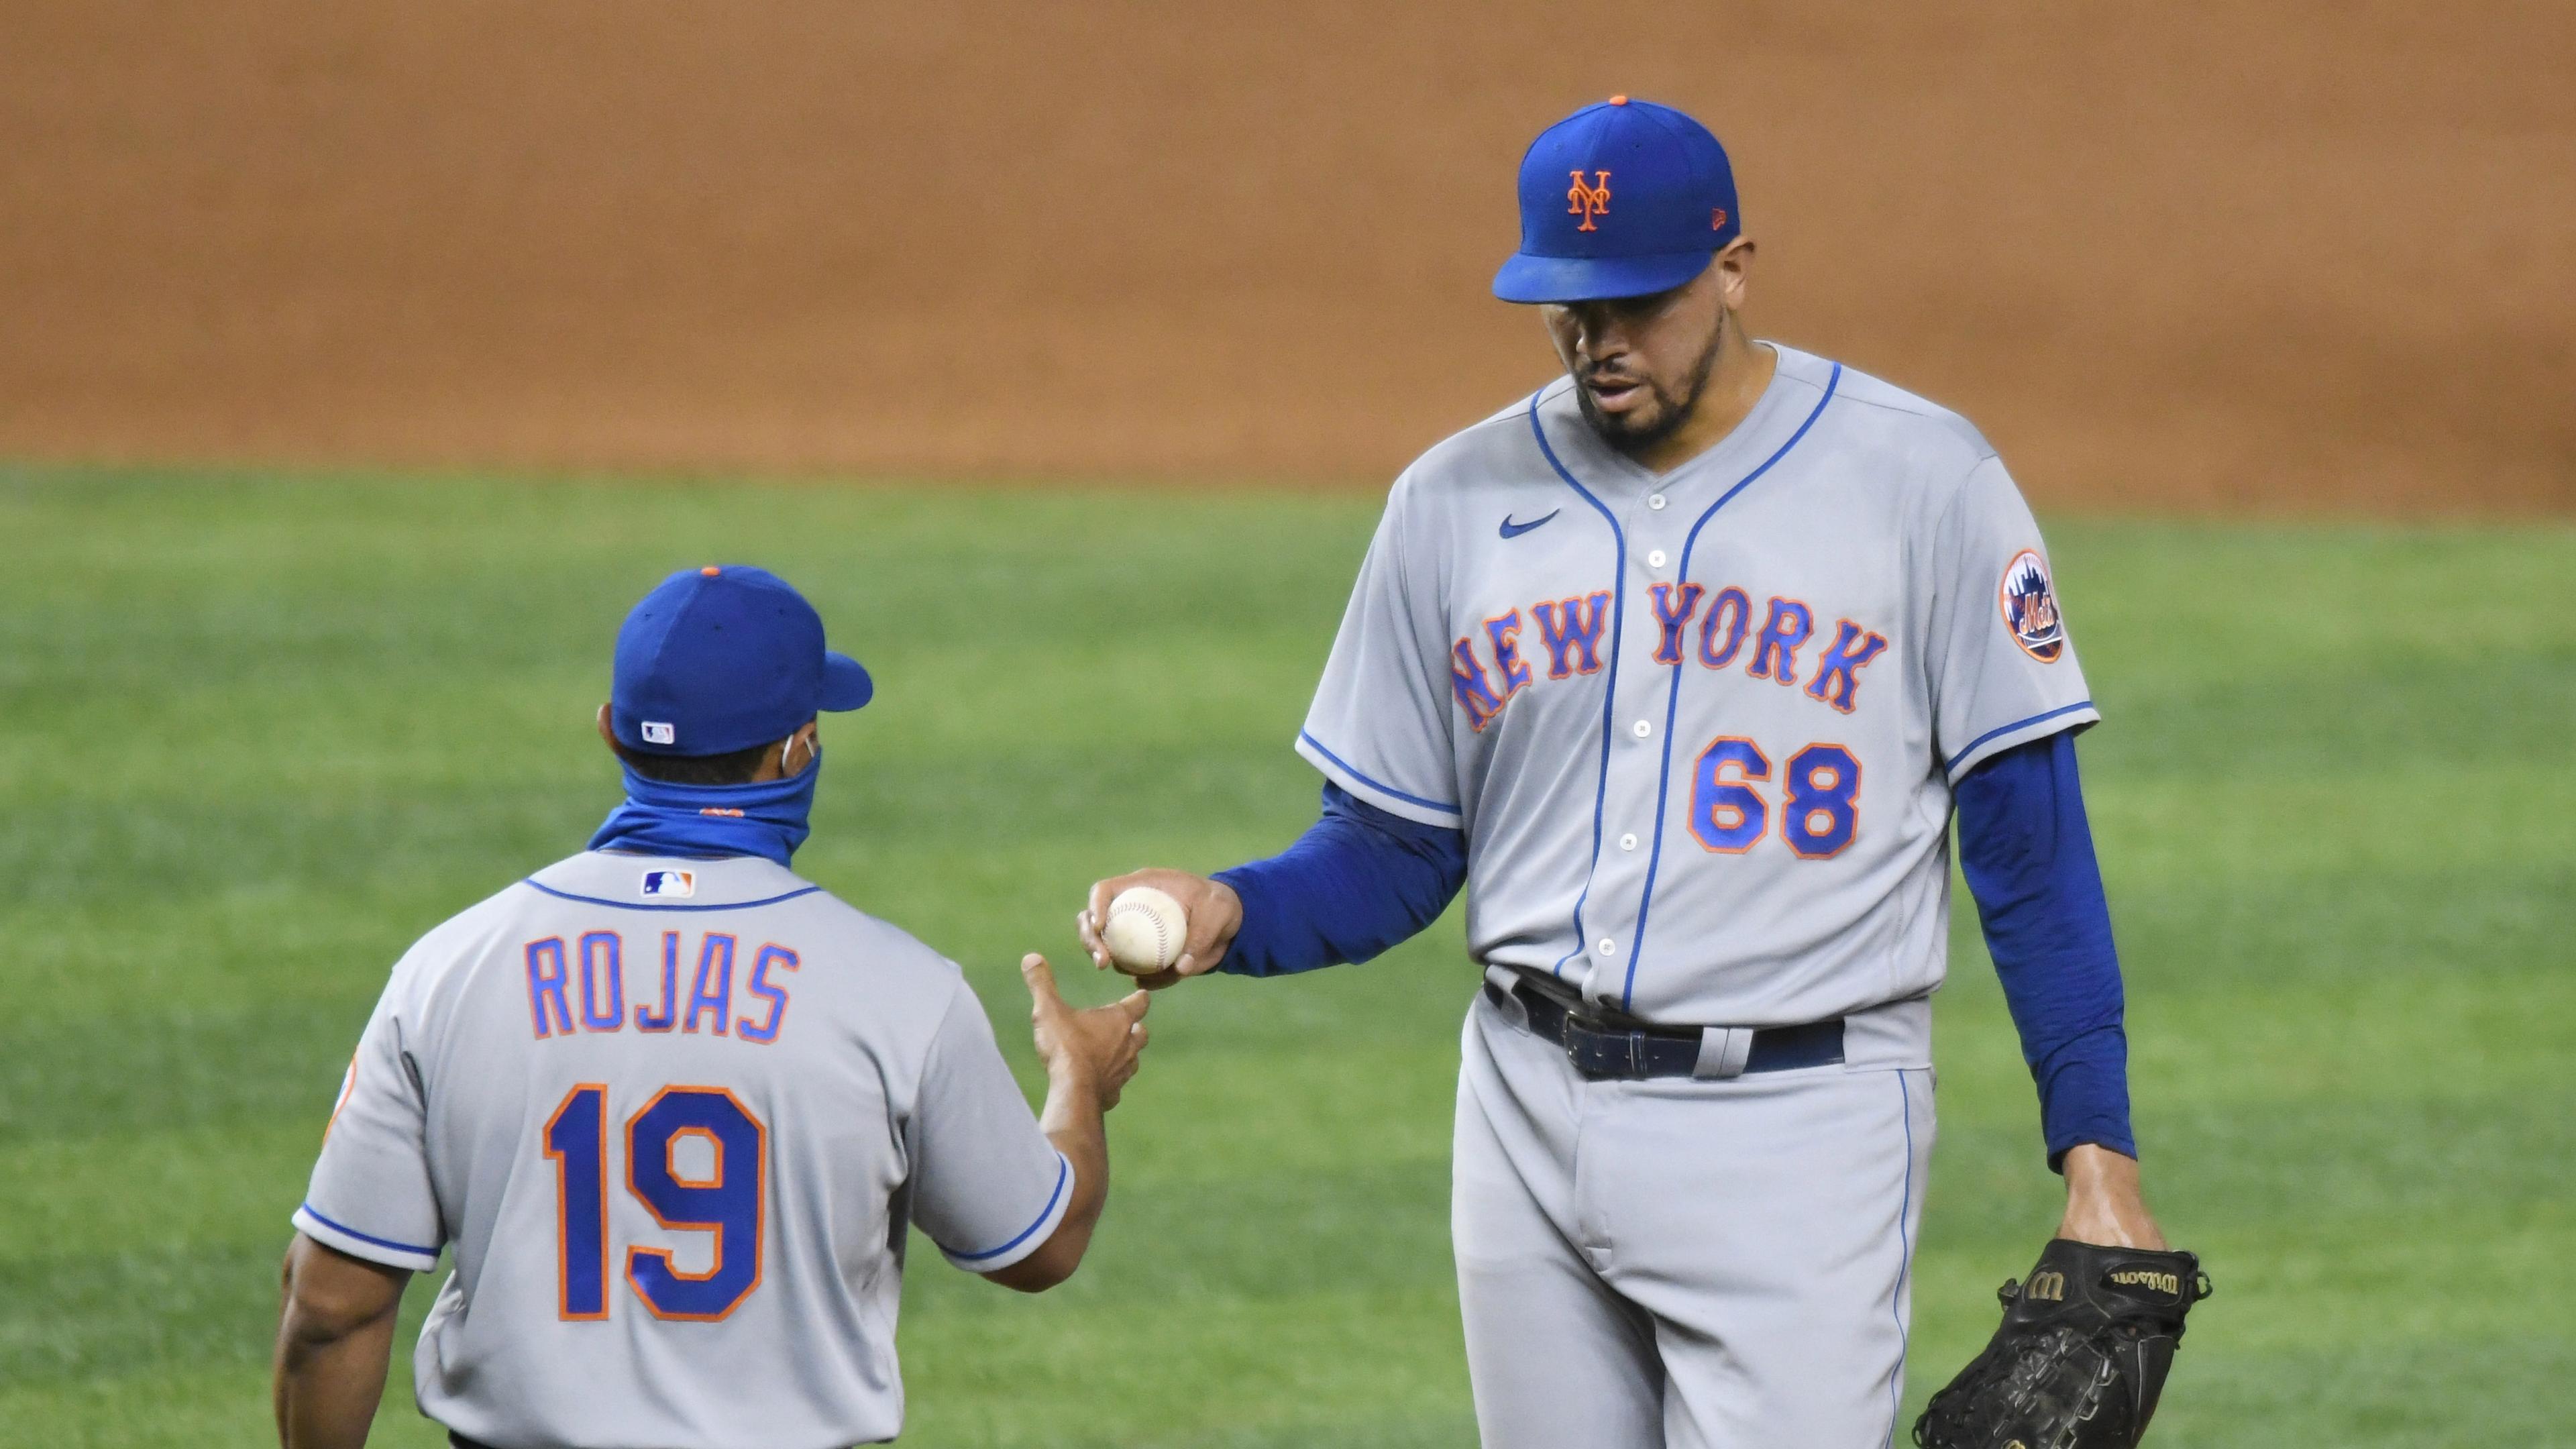 Dellin Betances hands ball over to Luis Rojas / USA TODAY